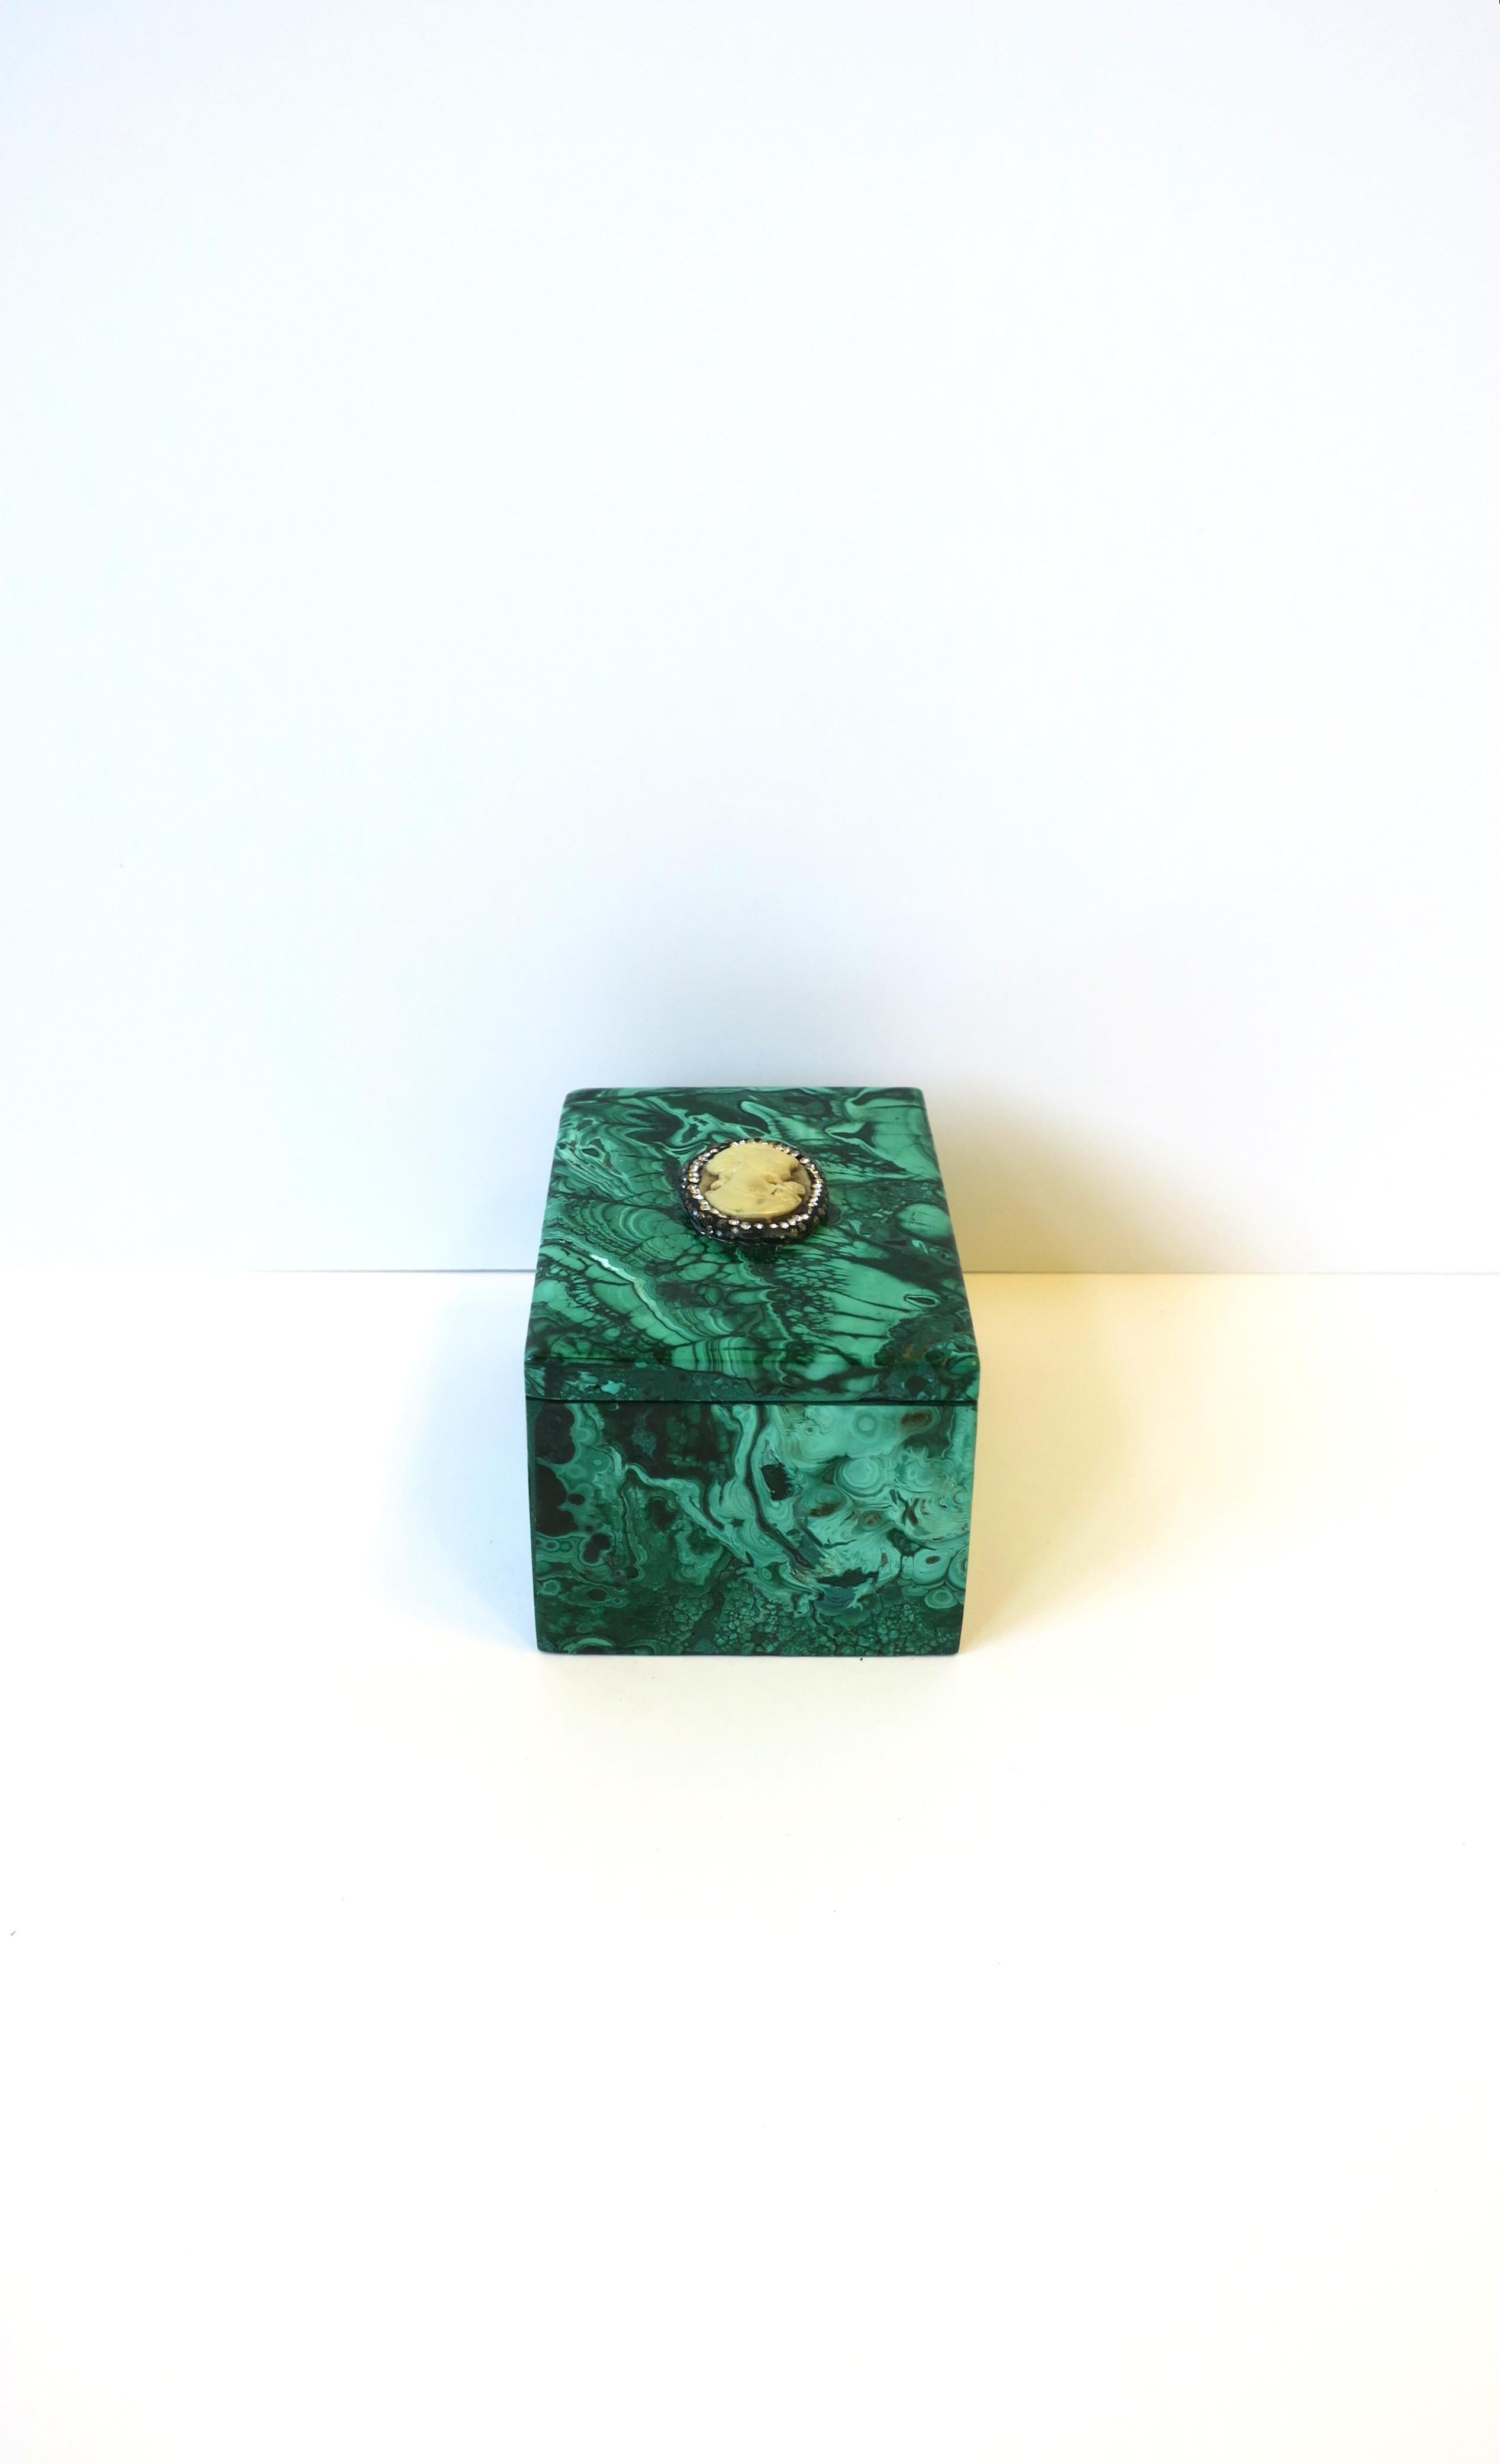 Hand-Crafted Malachite Jewelry Box with Cameo Design For Sale